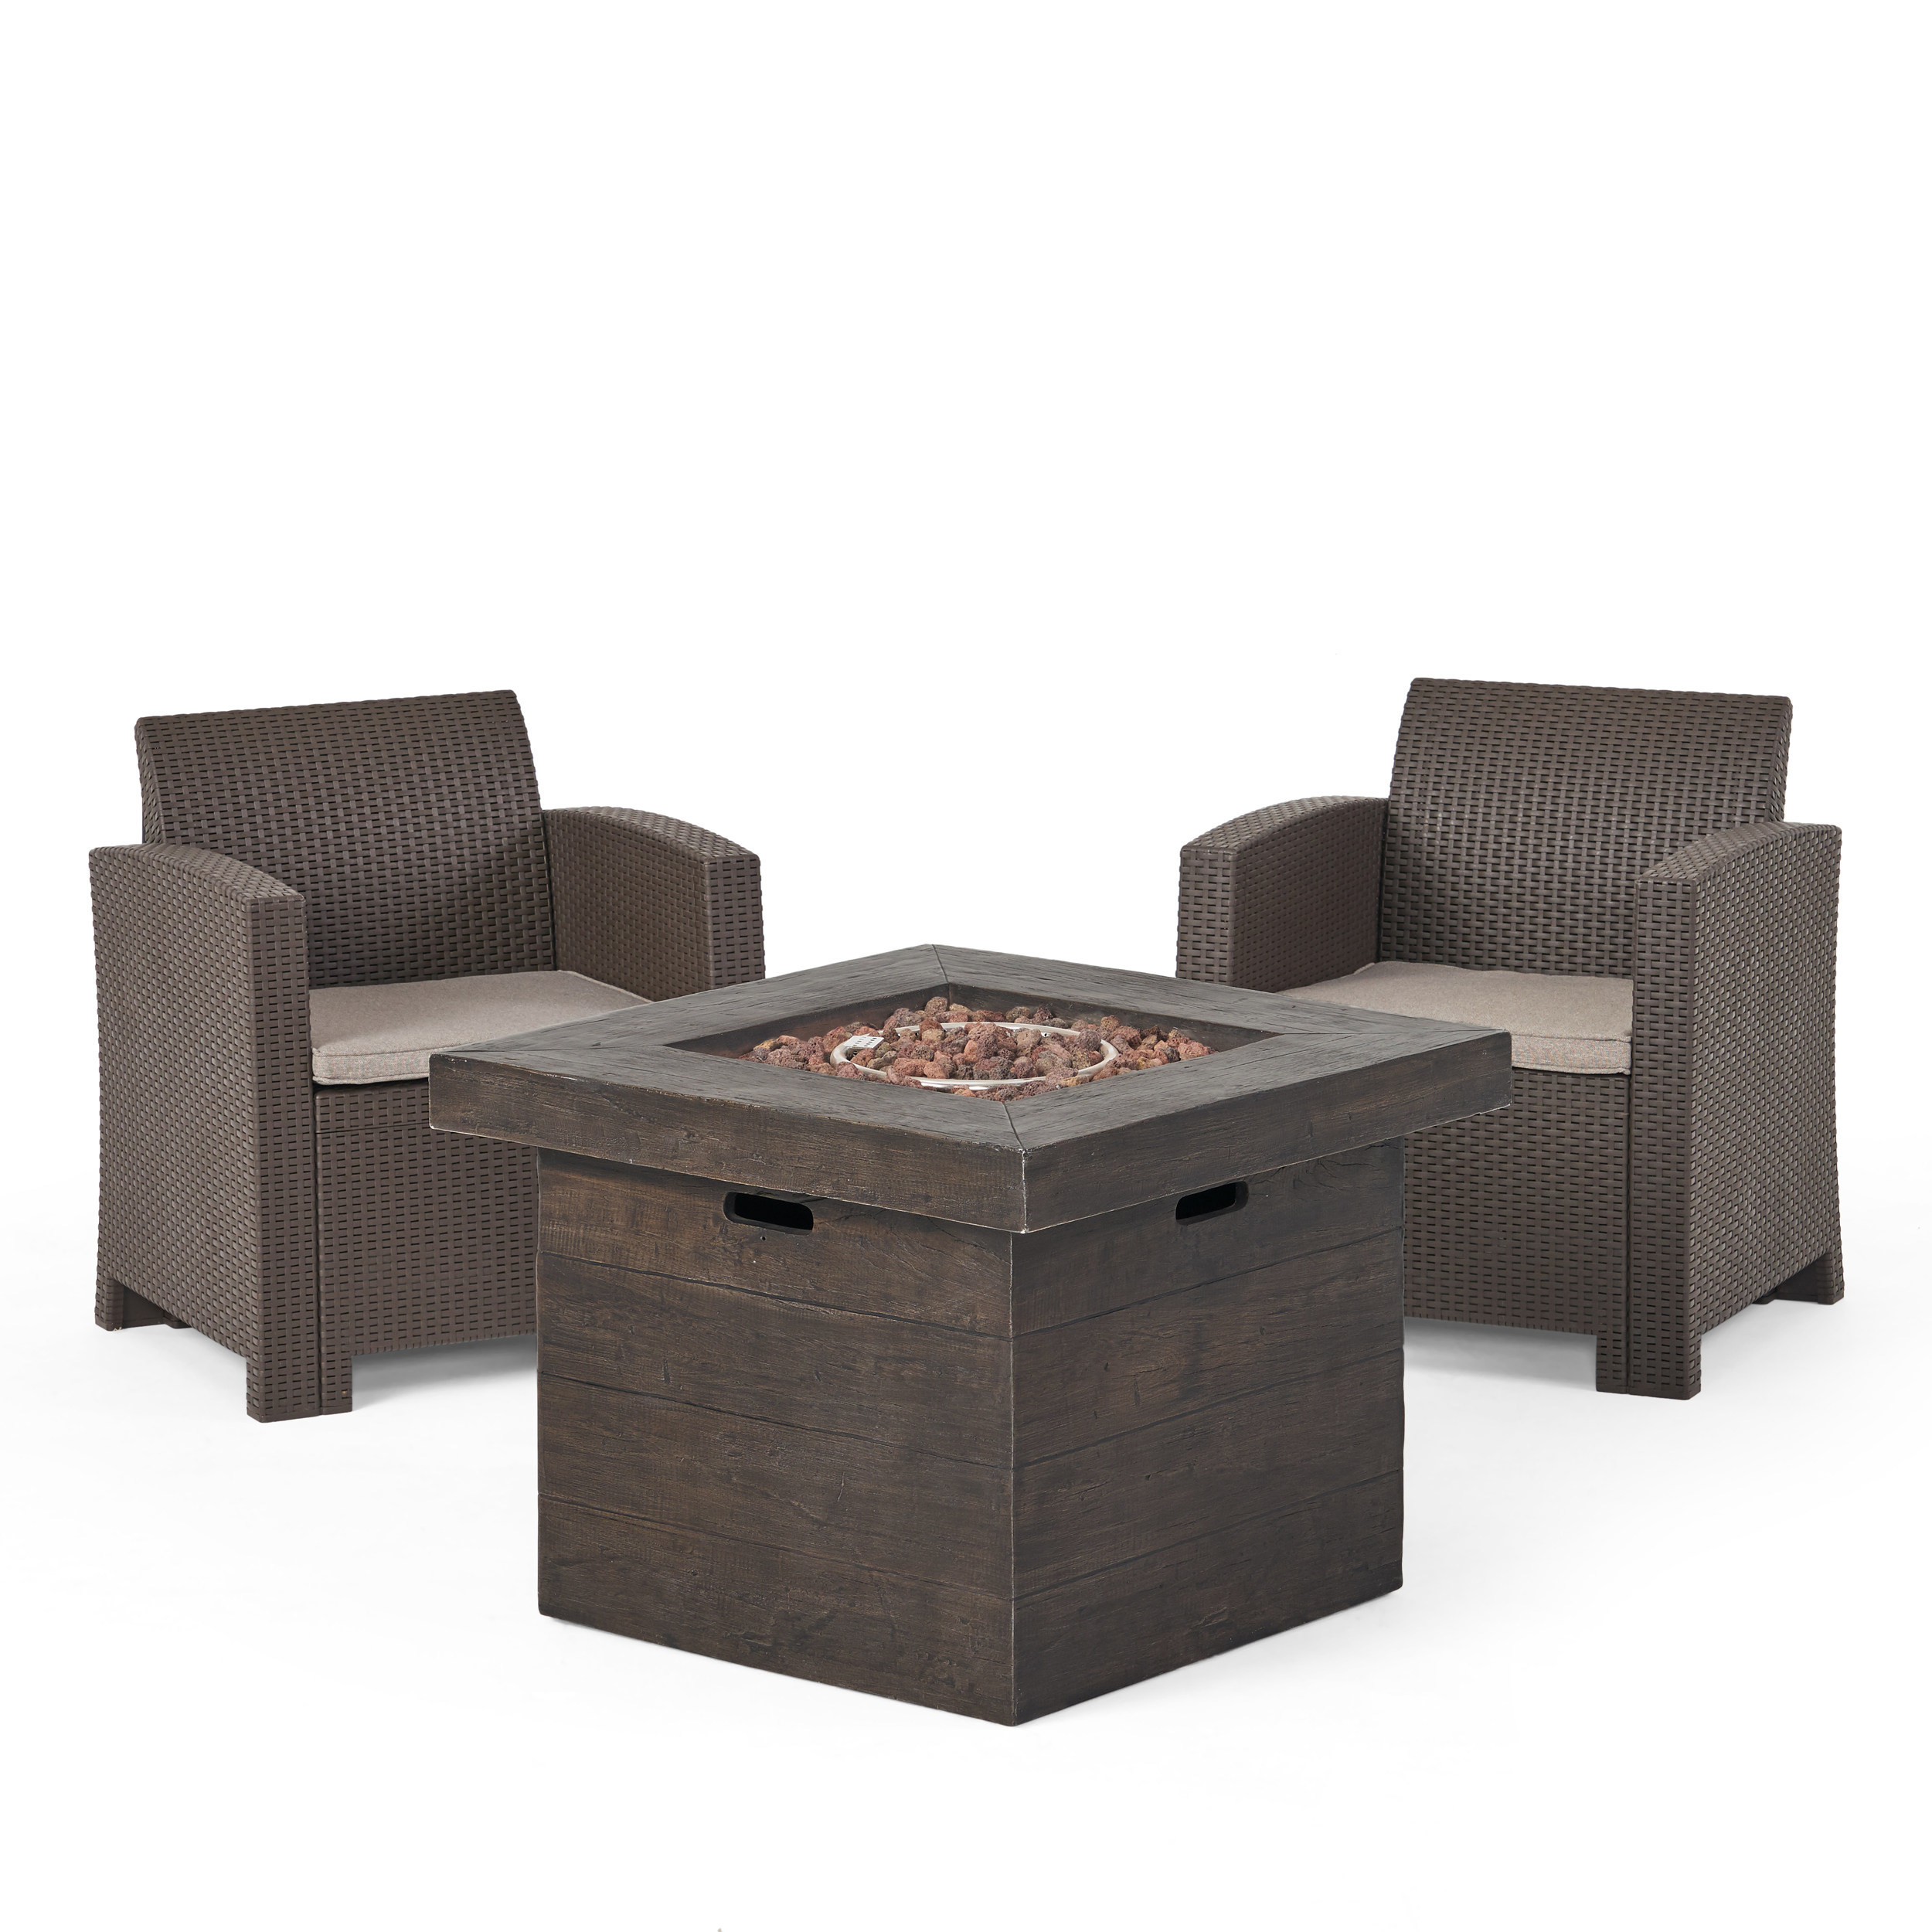 Ezequiel Outdoor 3 Piece Wicker Print Club Chair Chat Set with Cushions and Fire Pit, Brown, Mixed Biege, Brown - image 1 of 18